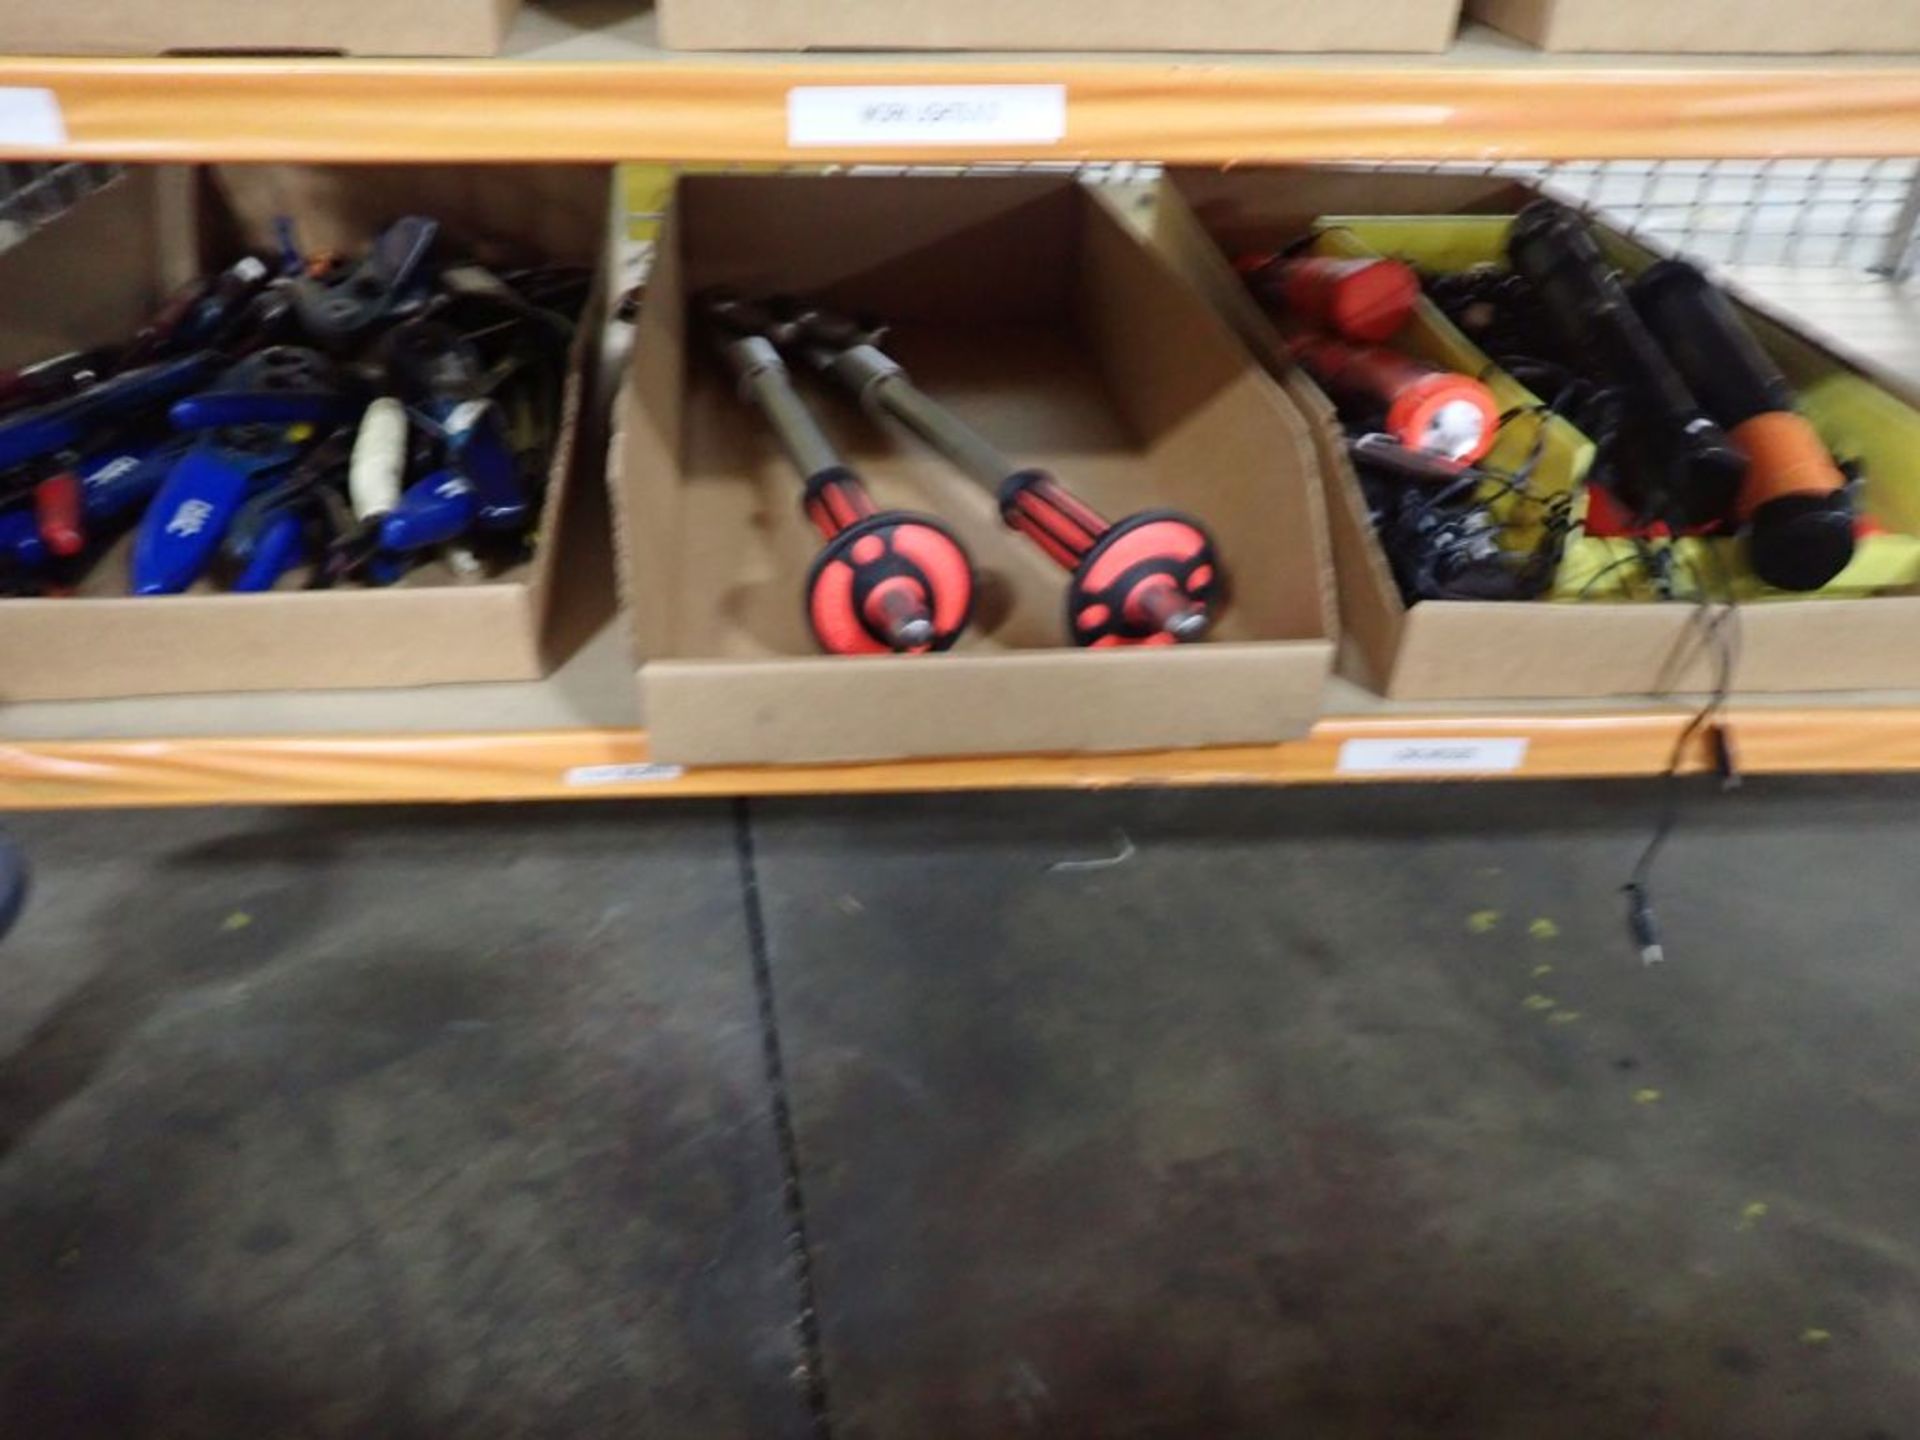 Lot of Assorted Tools | Tag: 241628 | Limited Forklift Assistance Available - $10.00 Lot Loading